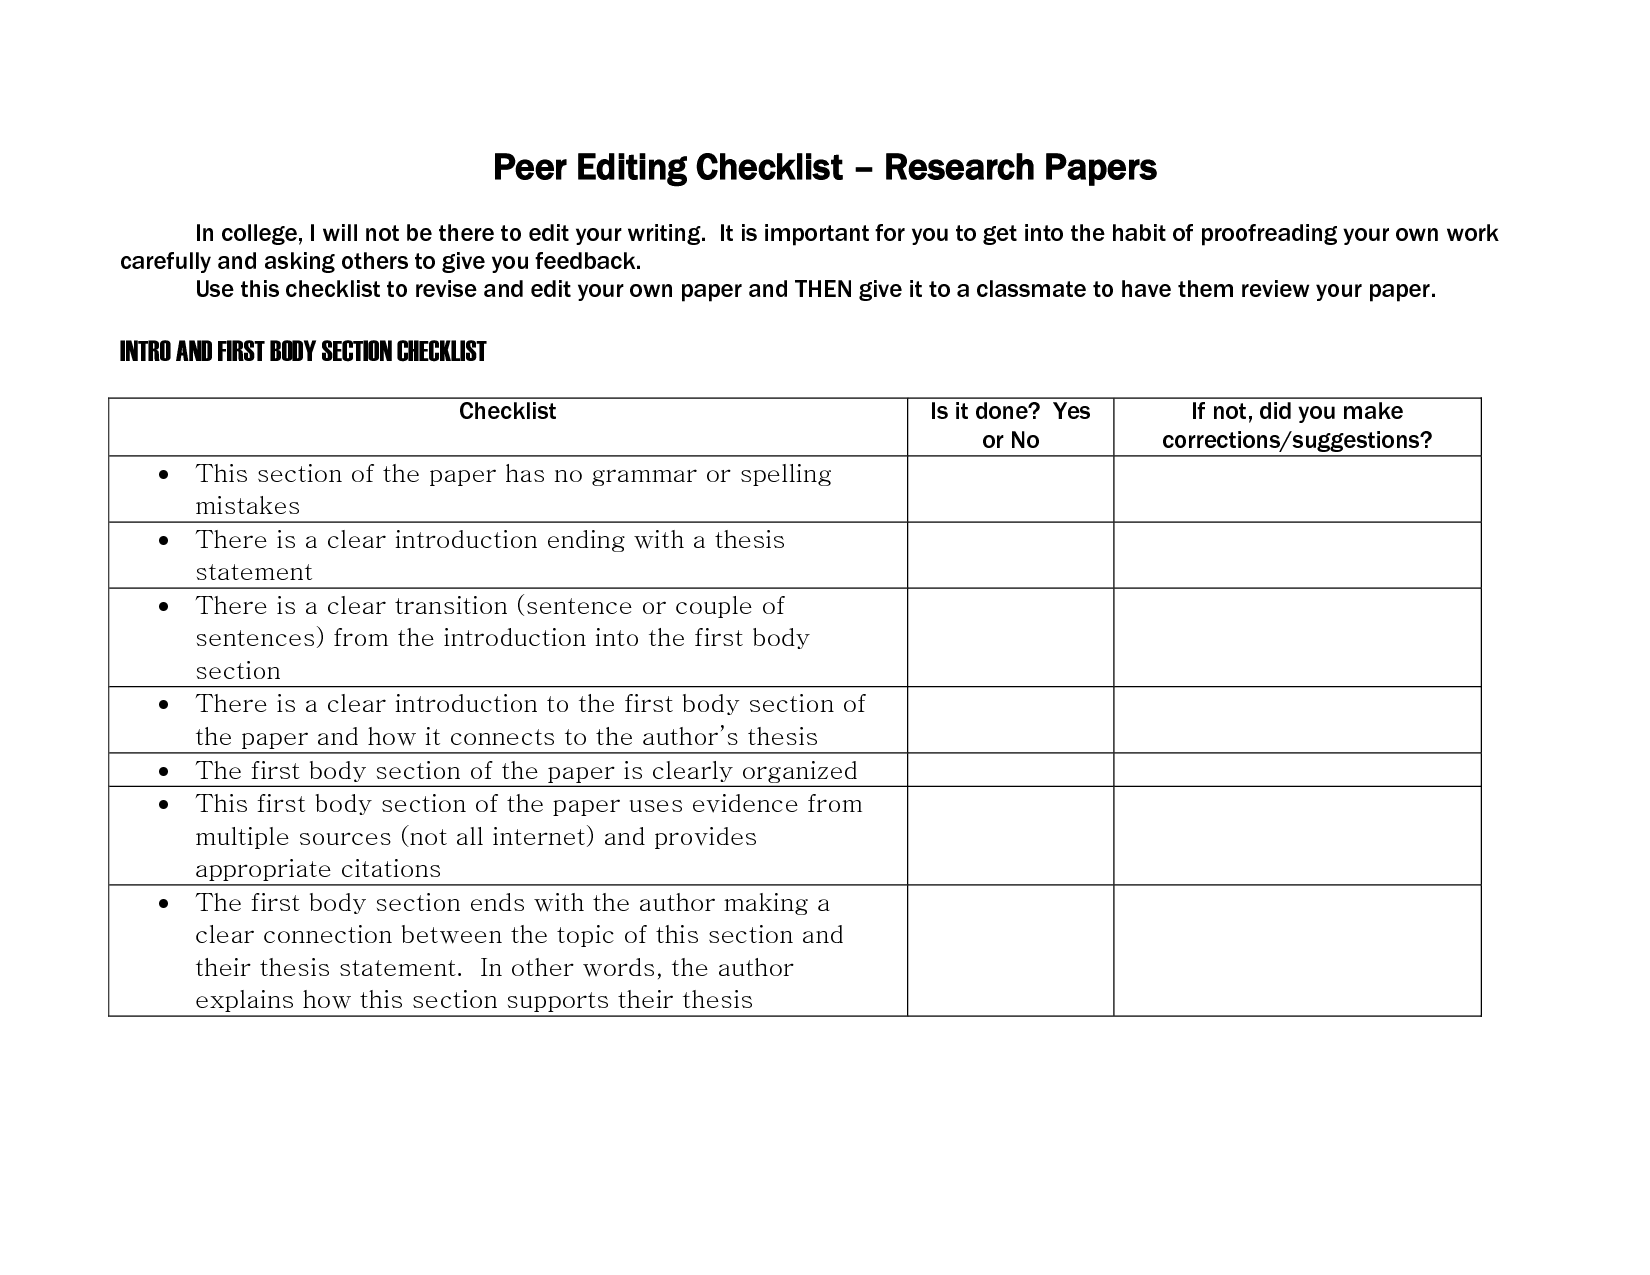 Research Paper Peer Editing Checklist